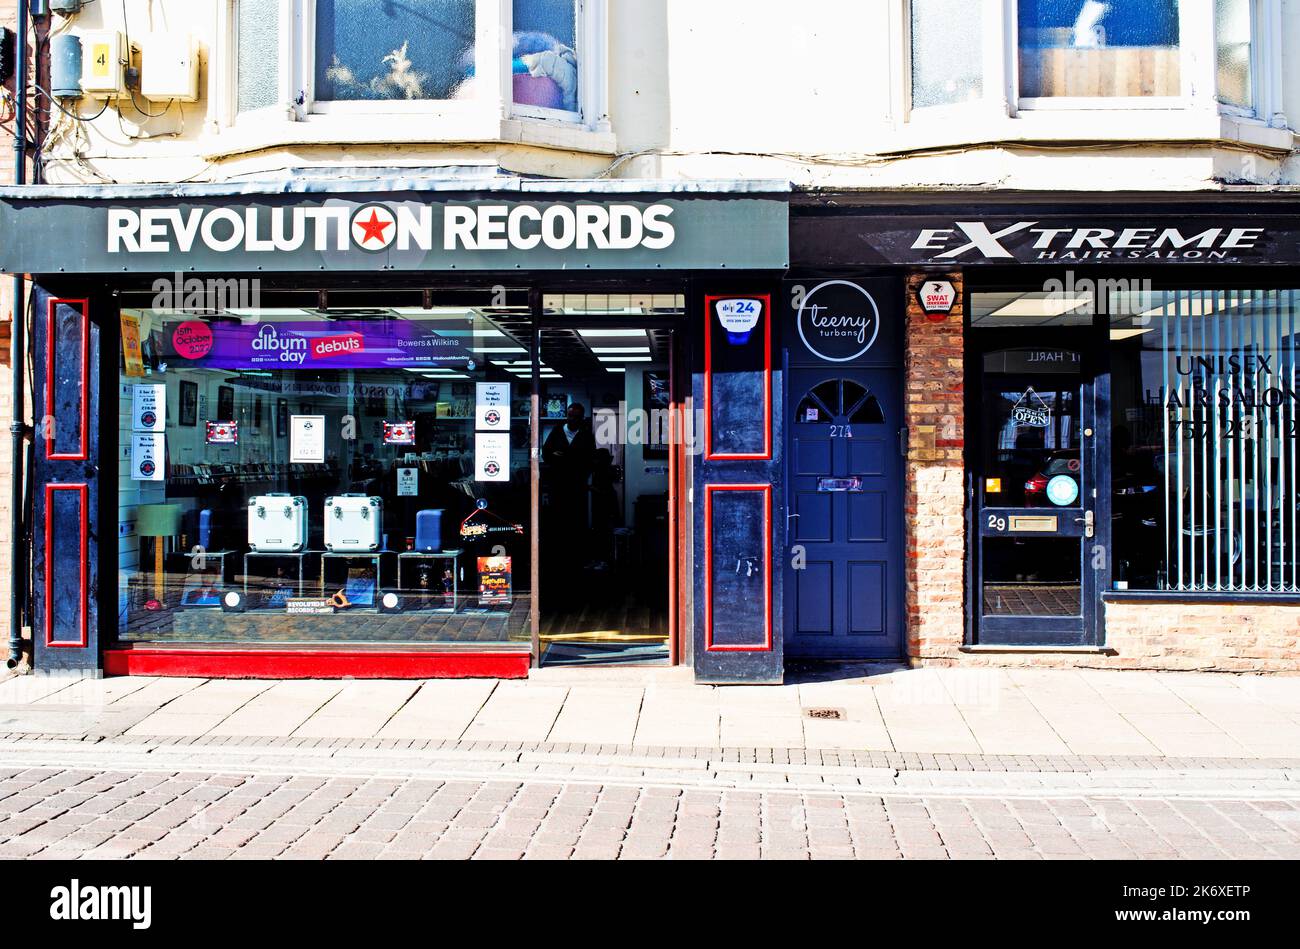 Revolution Records Store, Finkle Street, Selby, Yorkshire, England Stock Photo